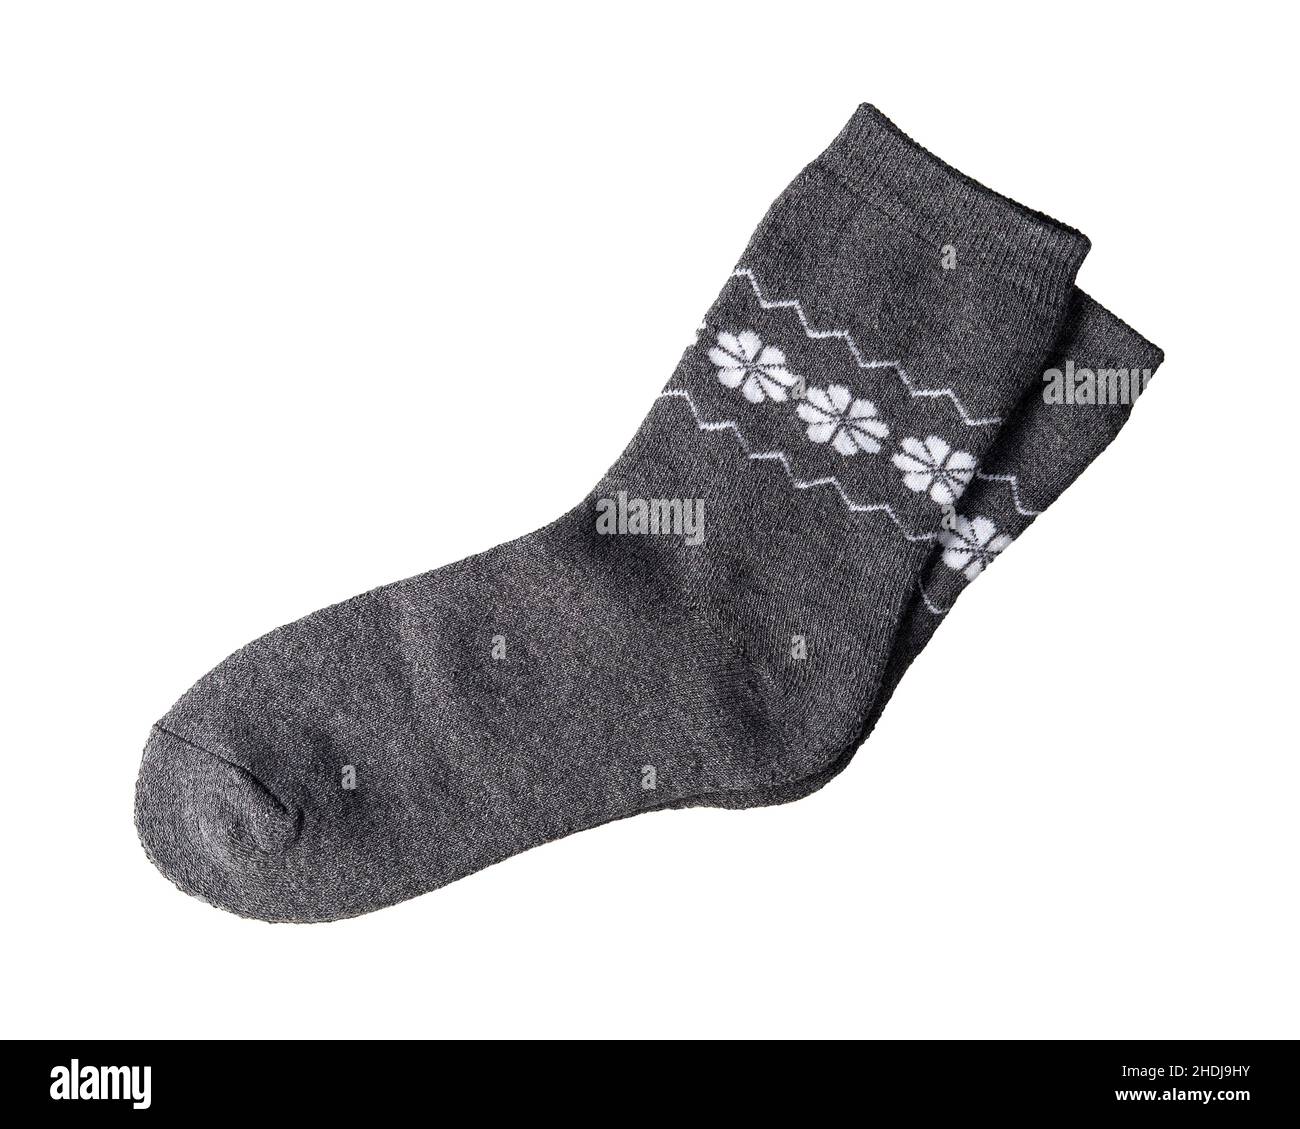 New gray wool socks isolated on a white background. Pair of warm socks with white floral pattern close-up. Hosiery design element for active lifestyle Stock Photo